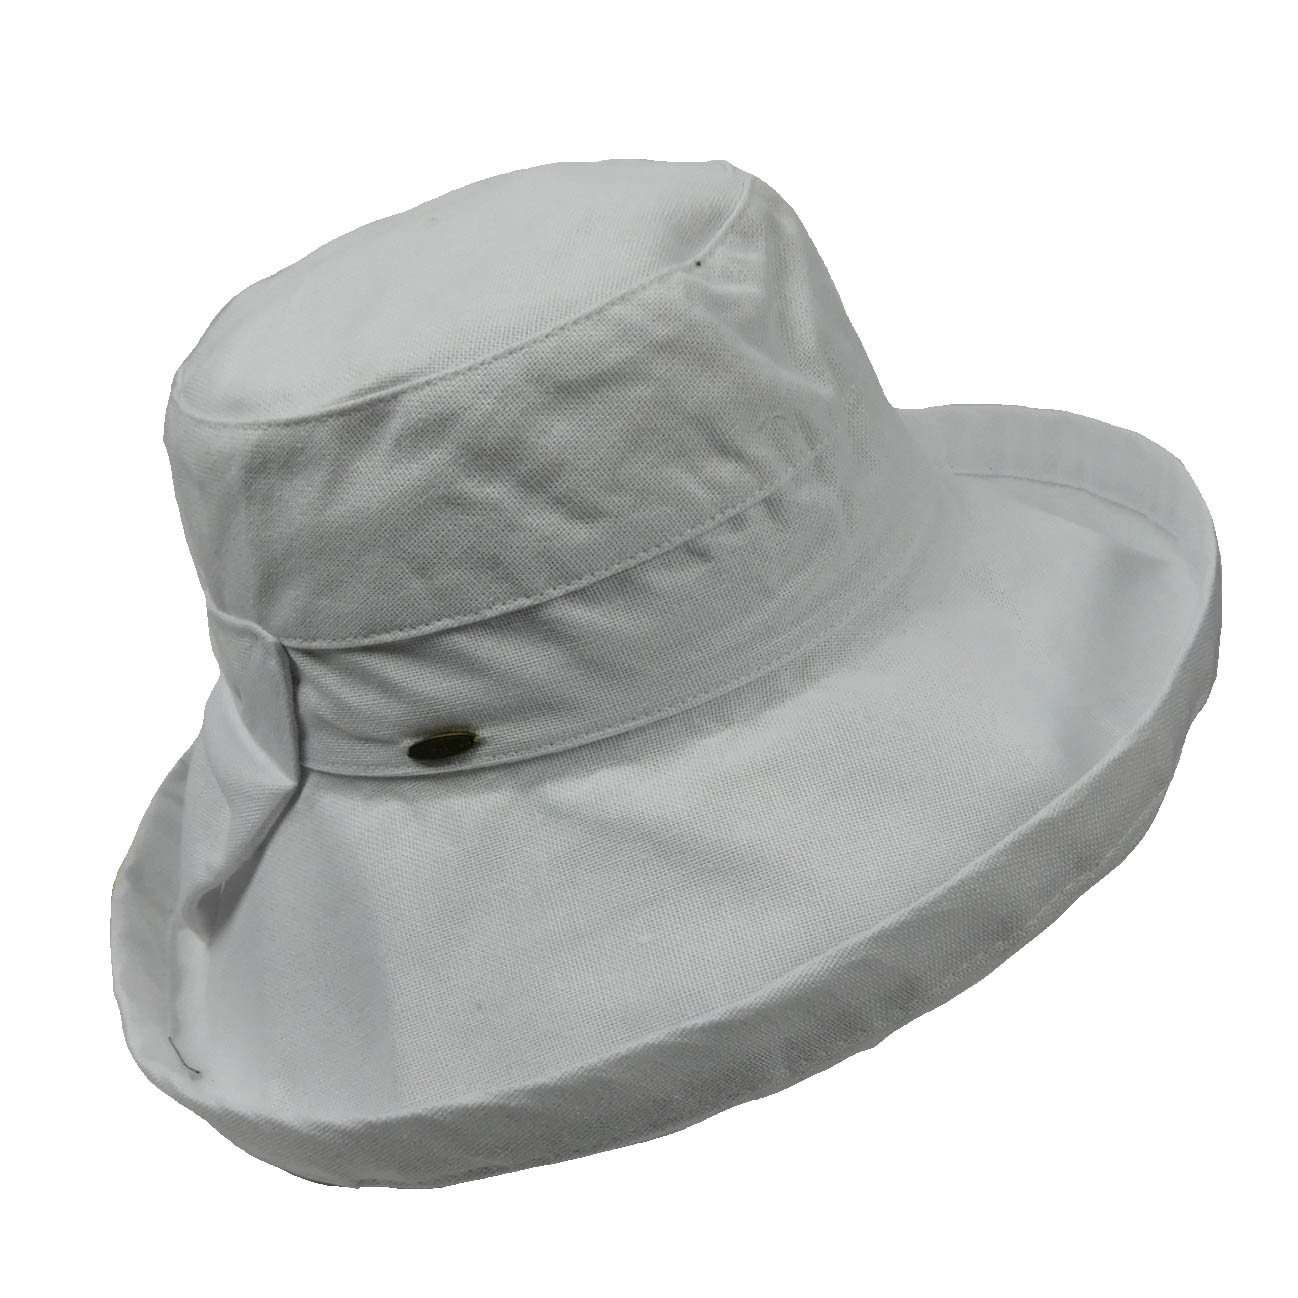 Kettle Brim Cotton Hat with Bow - Scala Hats Kettle Brim Hat Scala Hats WSCT638WH White  